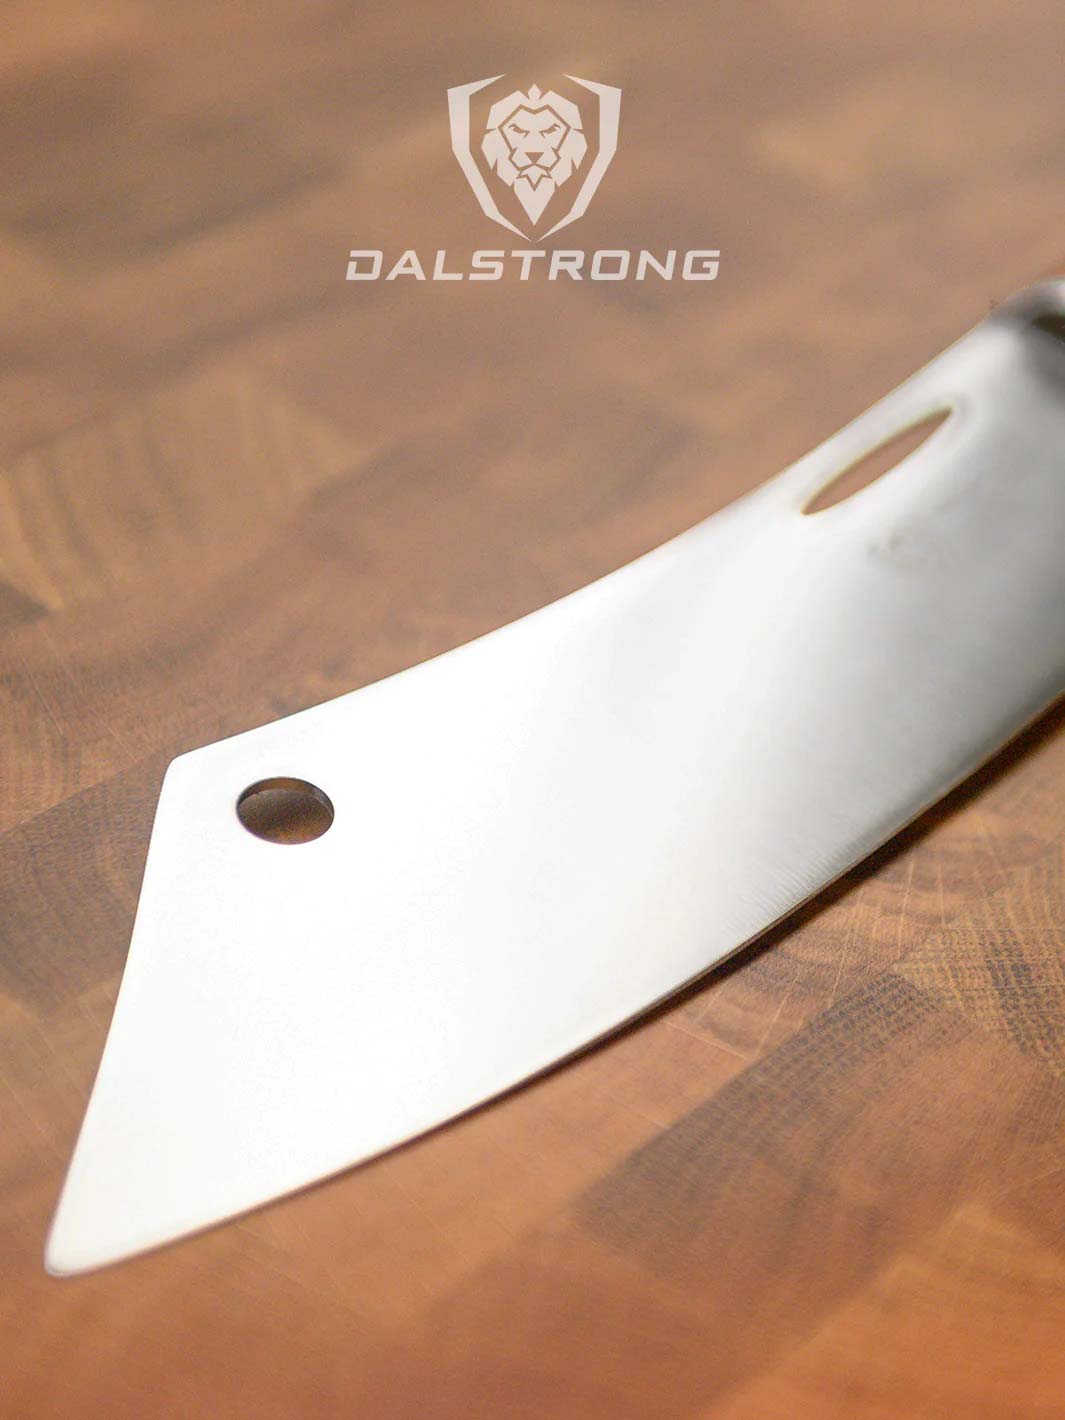 Chef & Cleaver Hybrid Knife 8" | The Crixus |  Centurion Series | Dalstrong ©